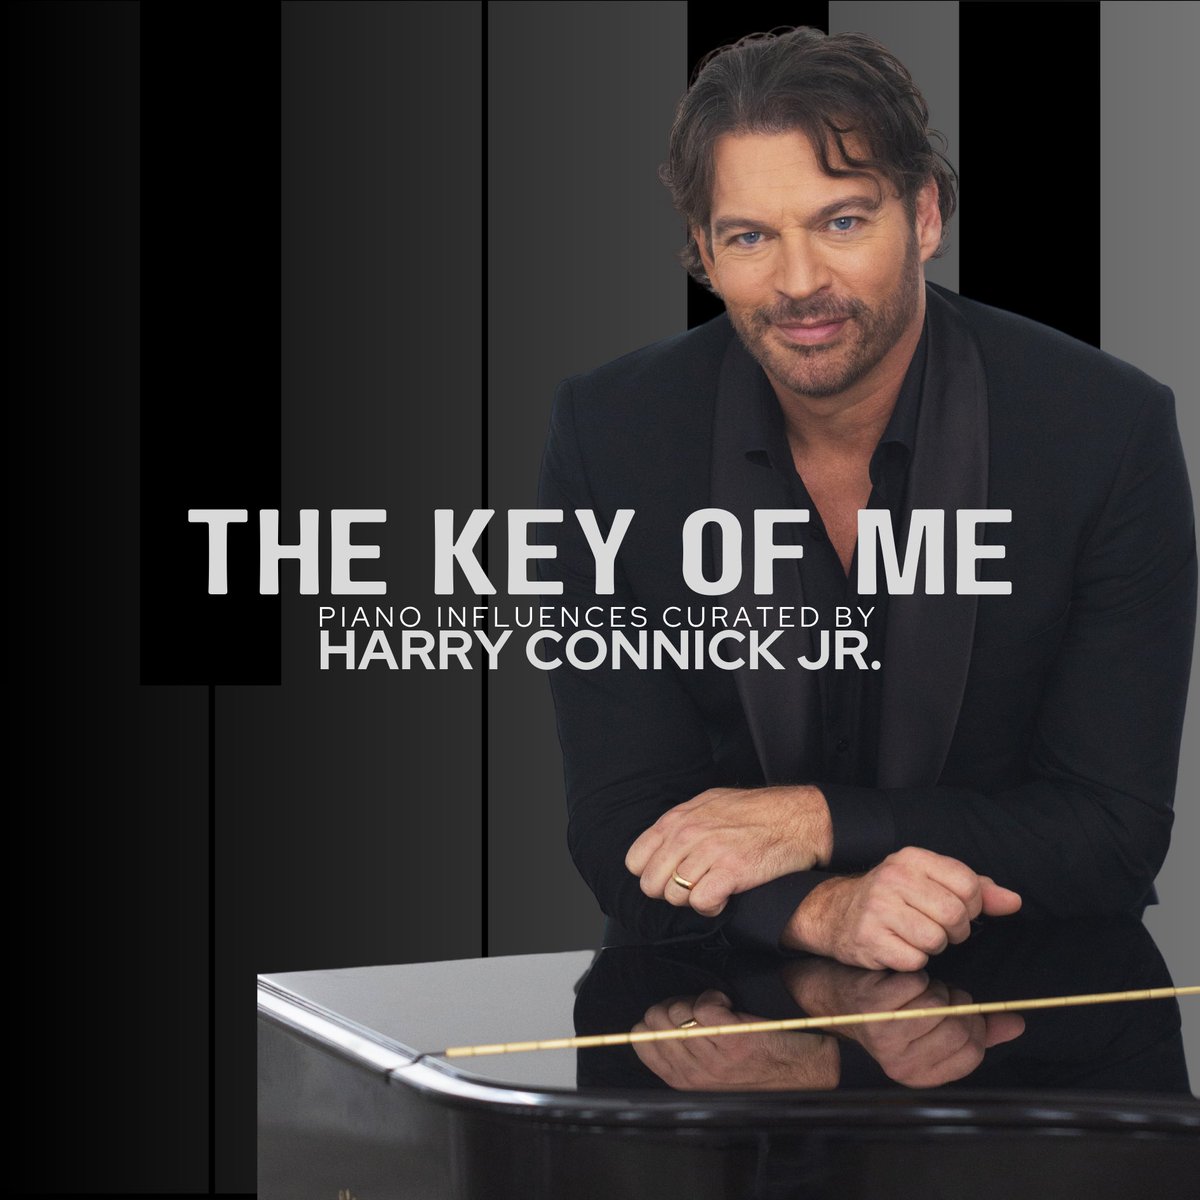 ‘the key of me’ 🎹 thinking about some of my favorite solo piano songs that have influenced me early on… maybe you’ll hear some of these on stage this winter down under! listen now! 😃 #HCJTheKeyOfMe open.spotify.com/playlist/6P437…